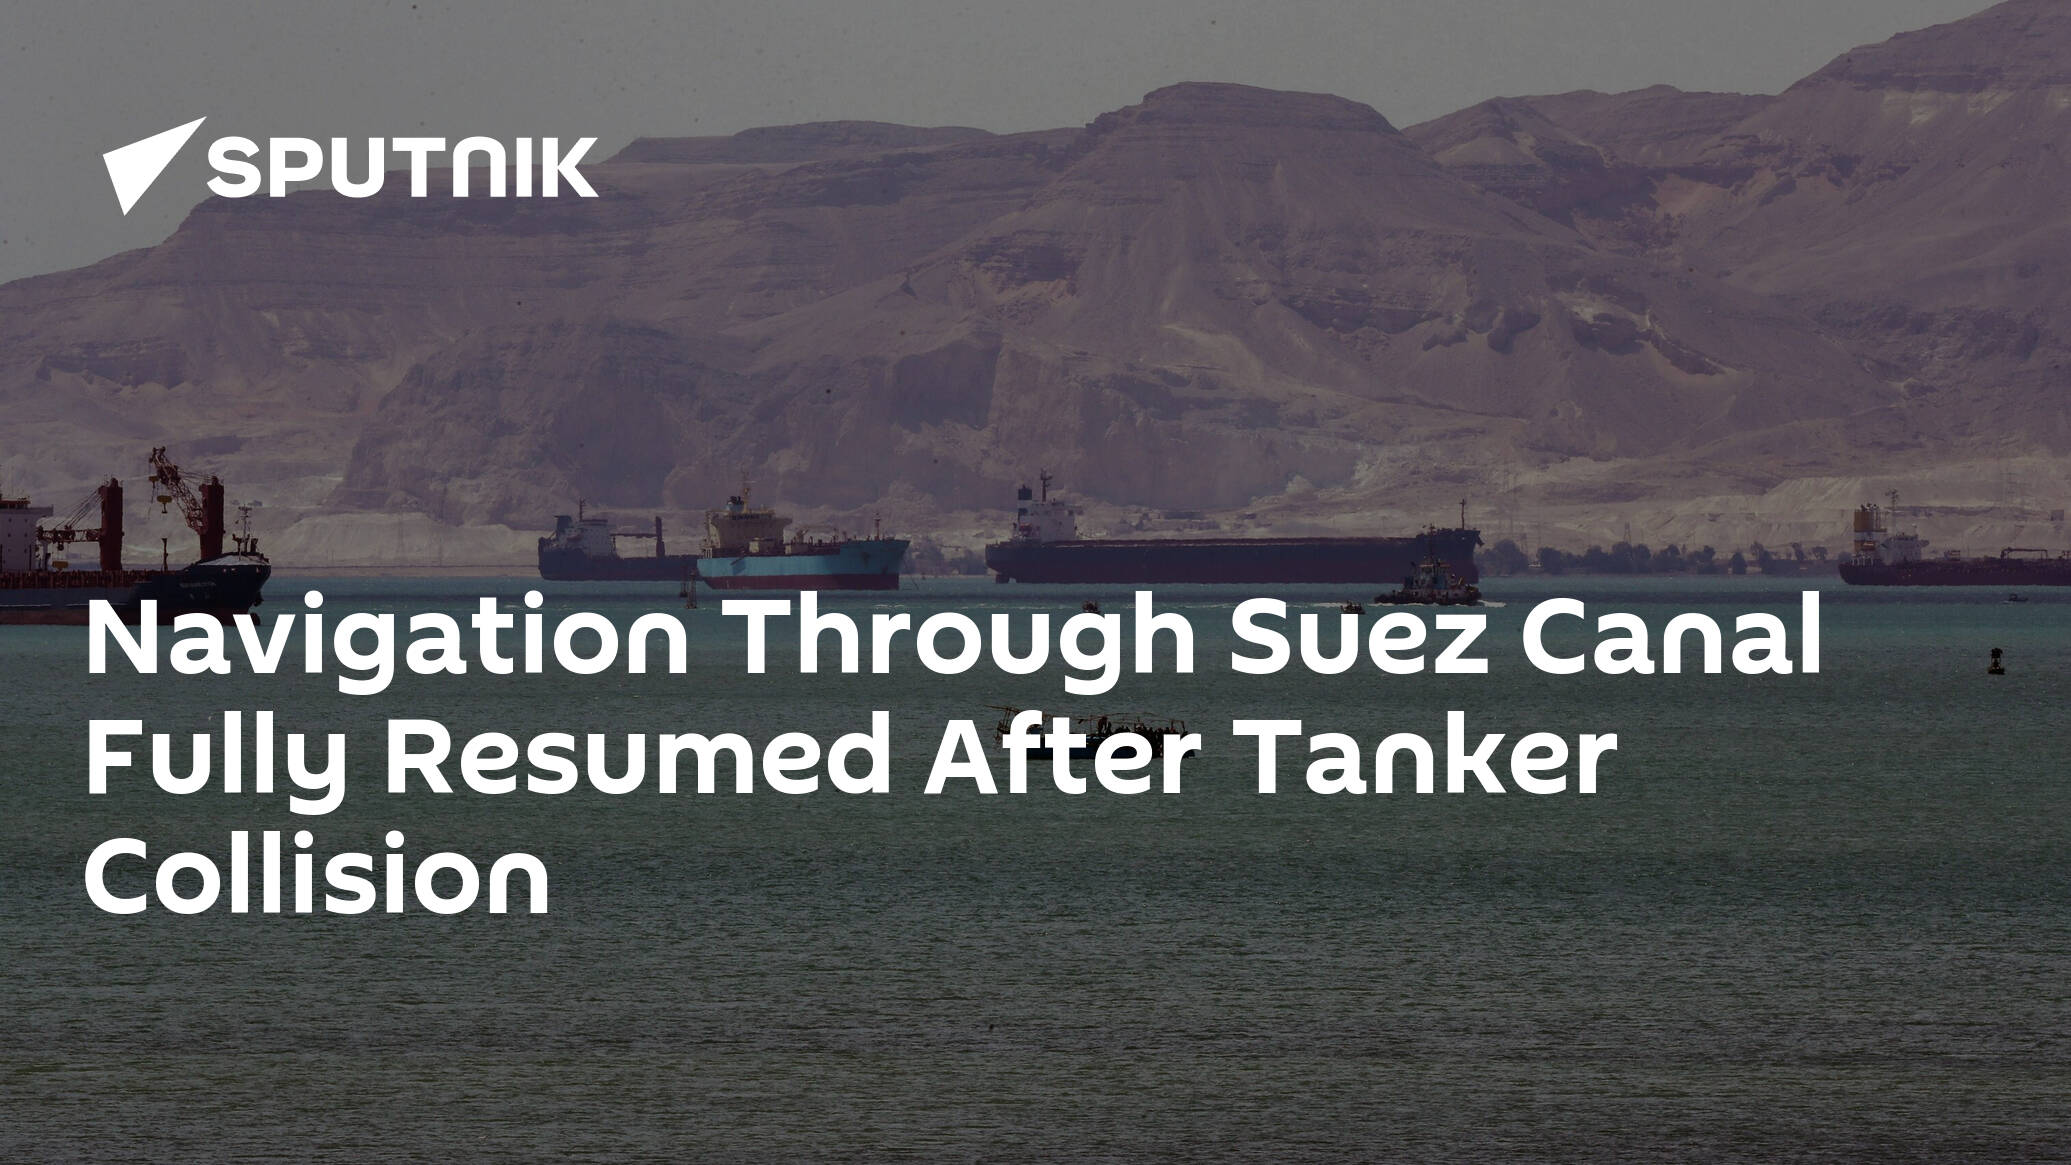 Navigation Through Suez Canal Fully Resumed After Tanker Collision